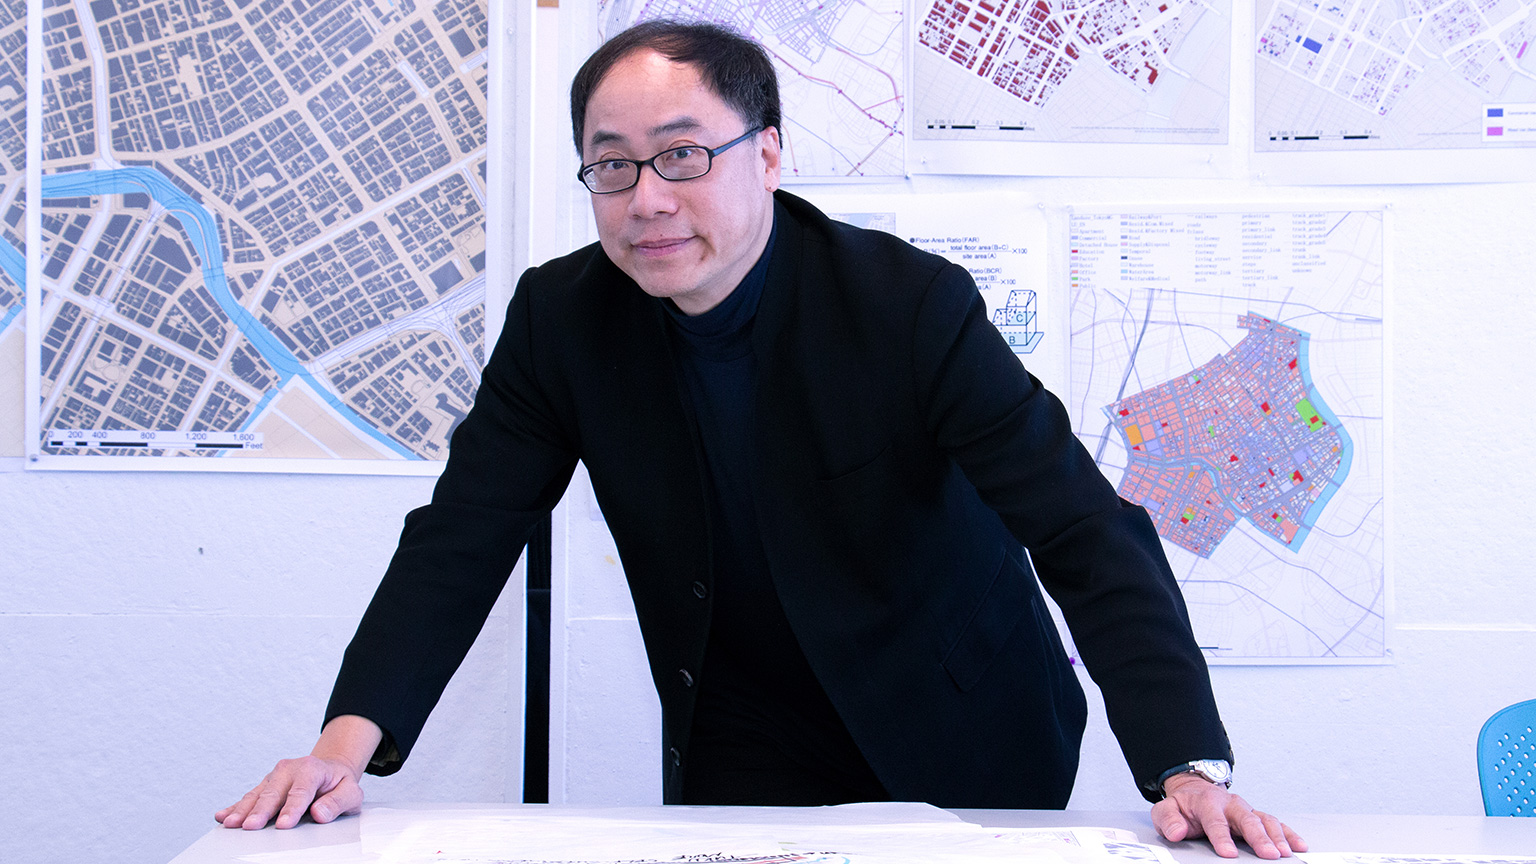 Perry Yang with Tokyo Smart City studio designs